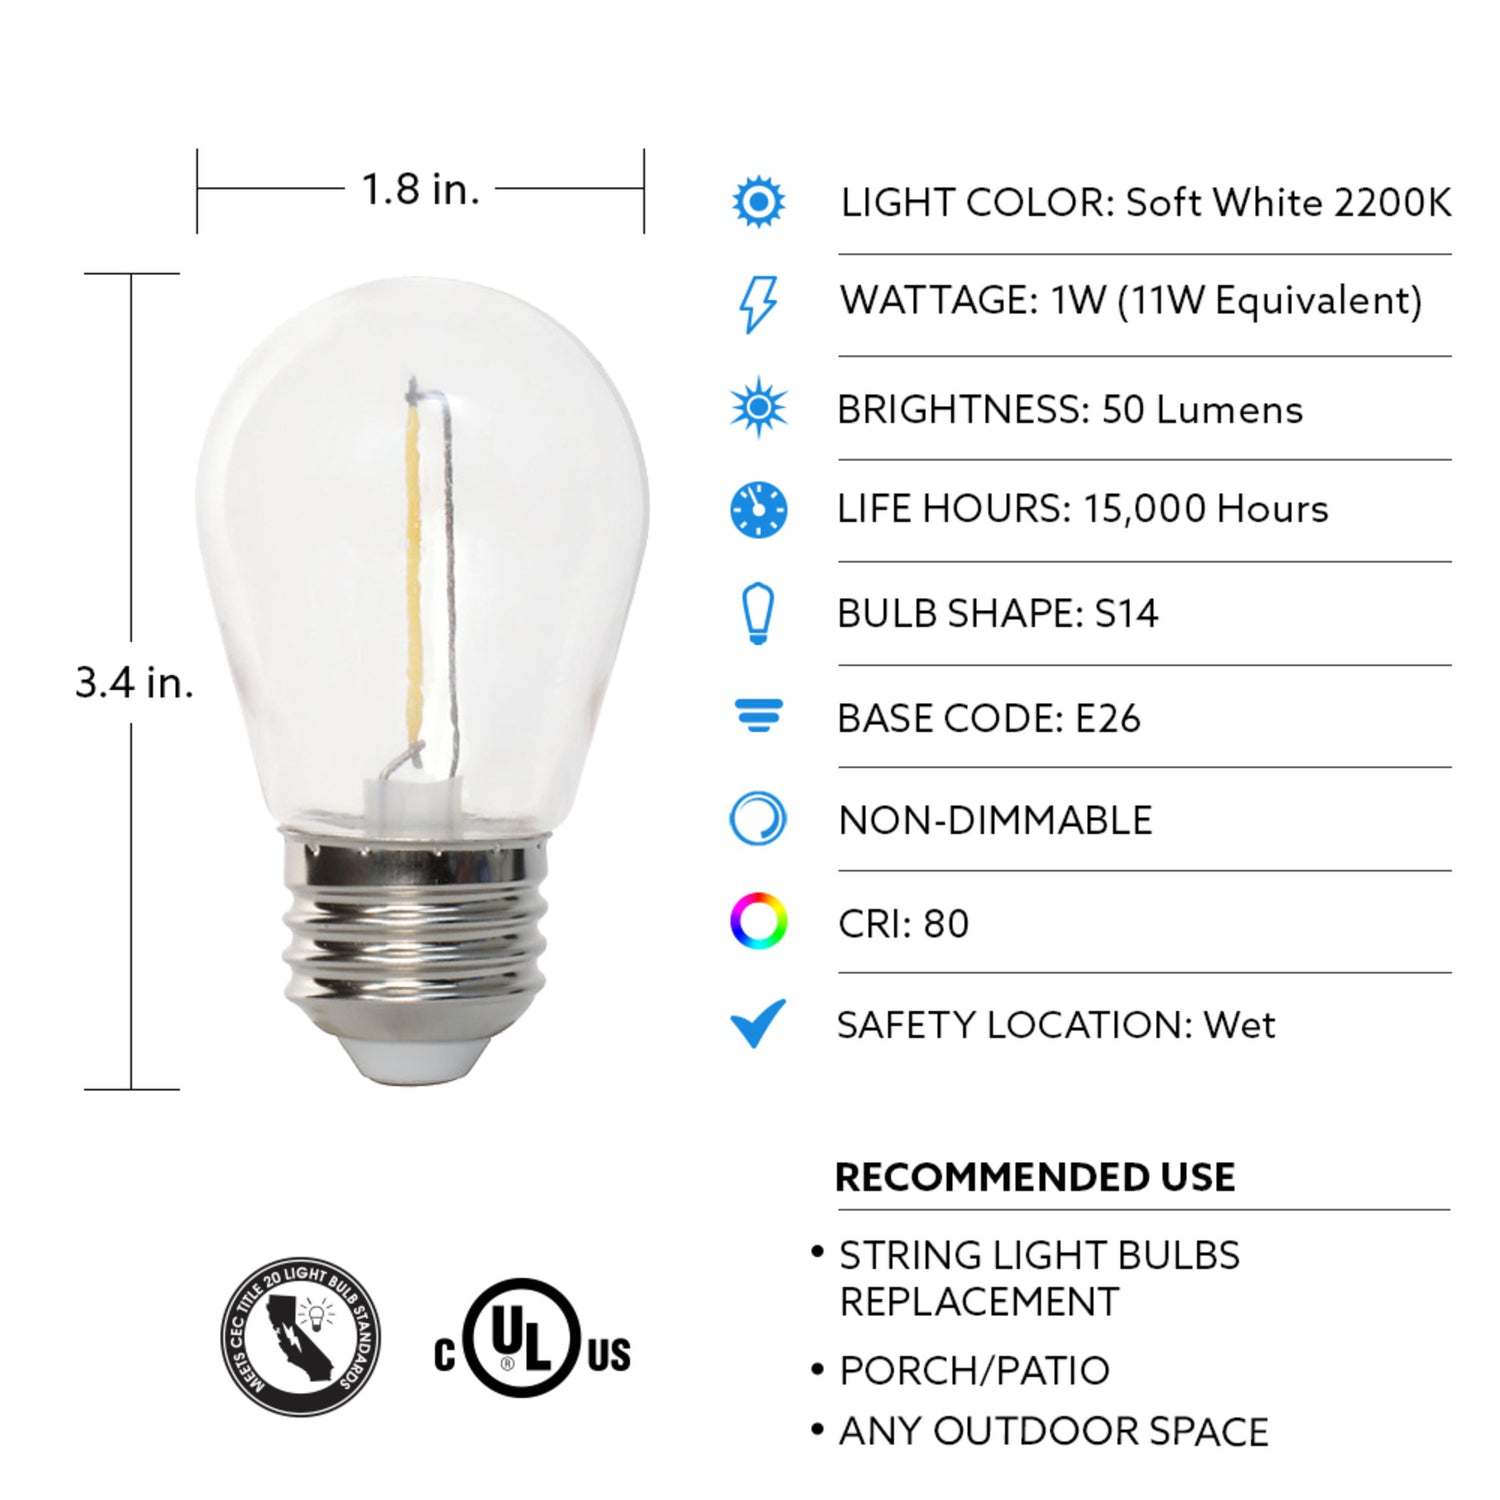 1W (11W Replacement) Warm White (2200K) E26 Base S14 Filament LED String Light Bulb Replacement (4-Pack)